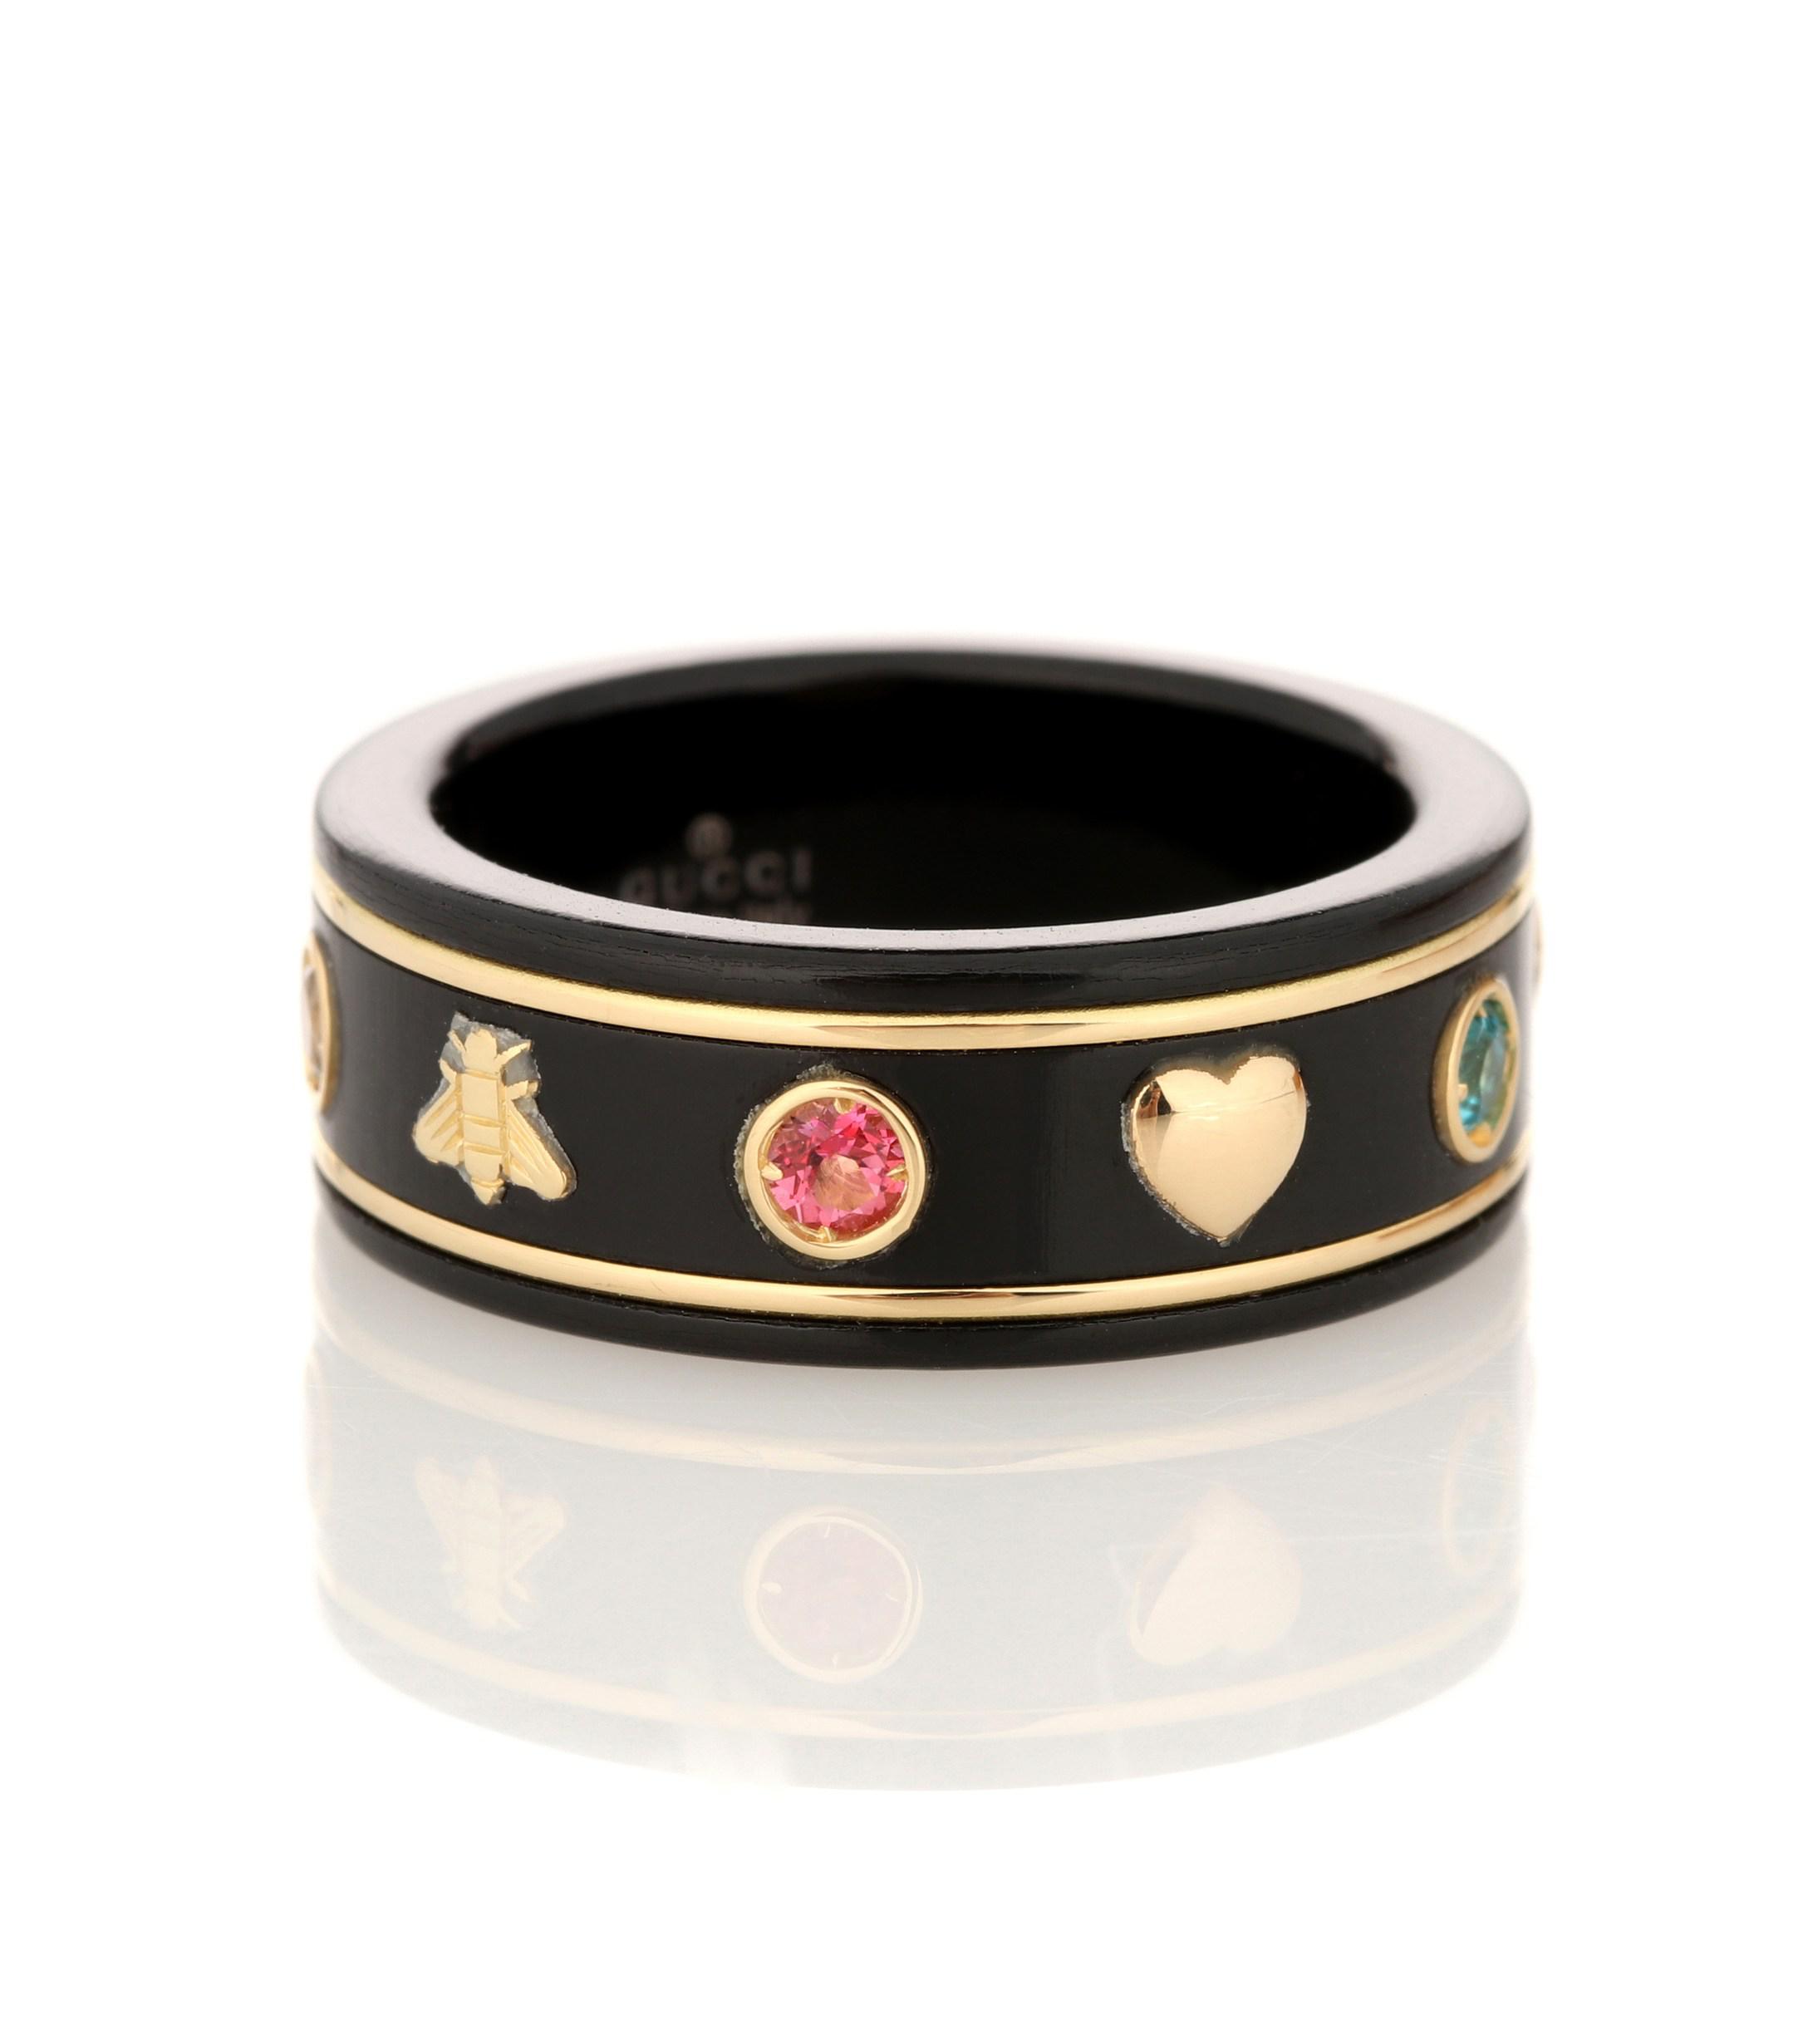 Lyst - Gucci Icon 18kt Gold Ring With Gemstones in Black